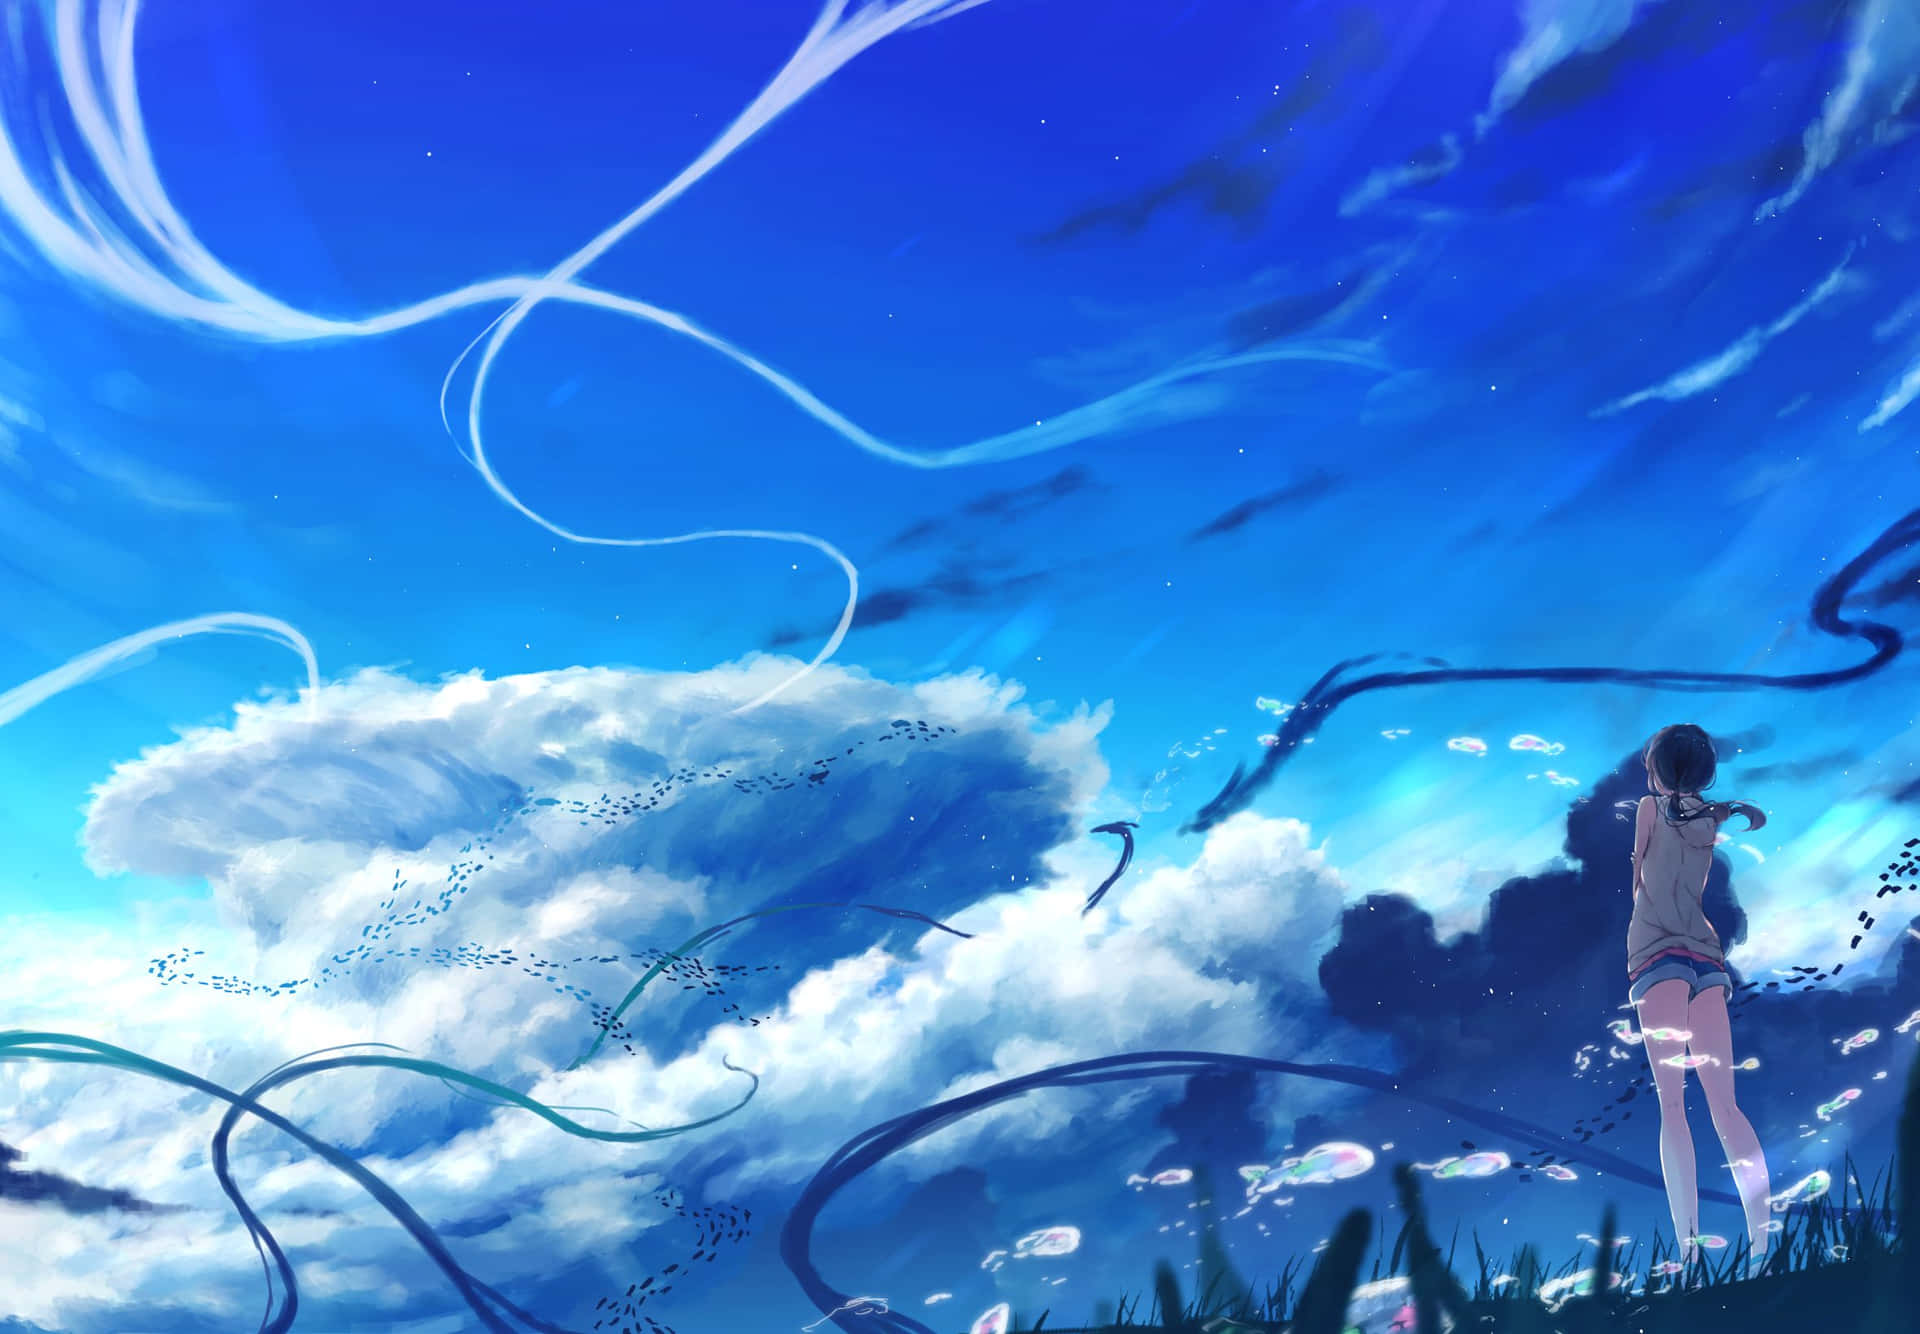 A Breath-taking View of an Anime Sky